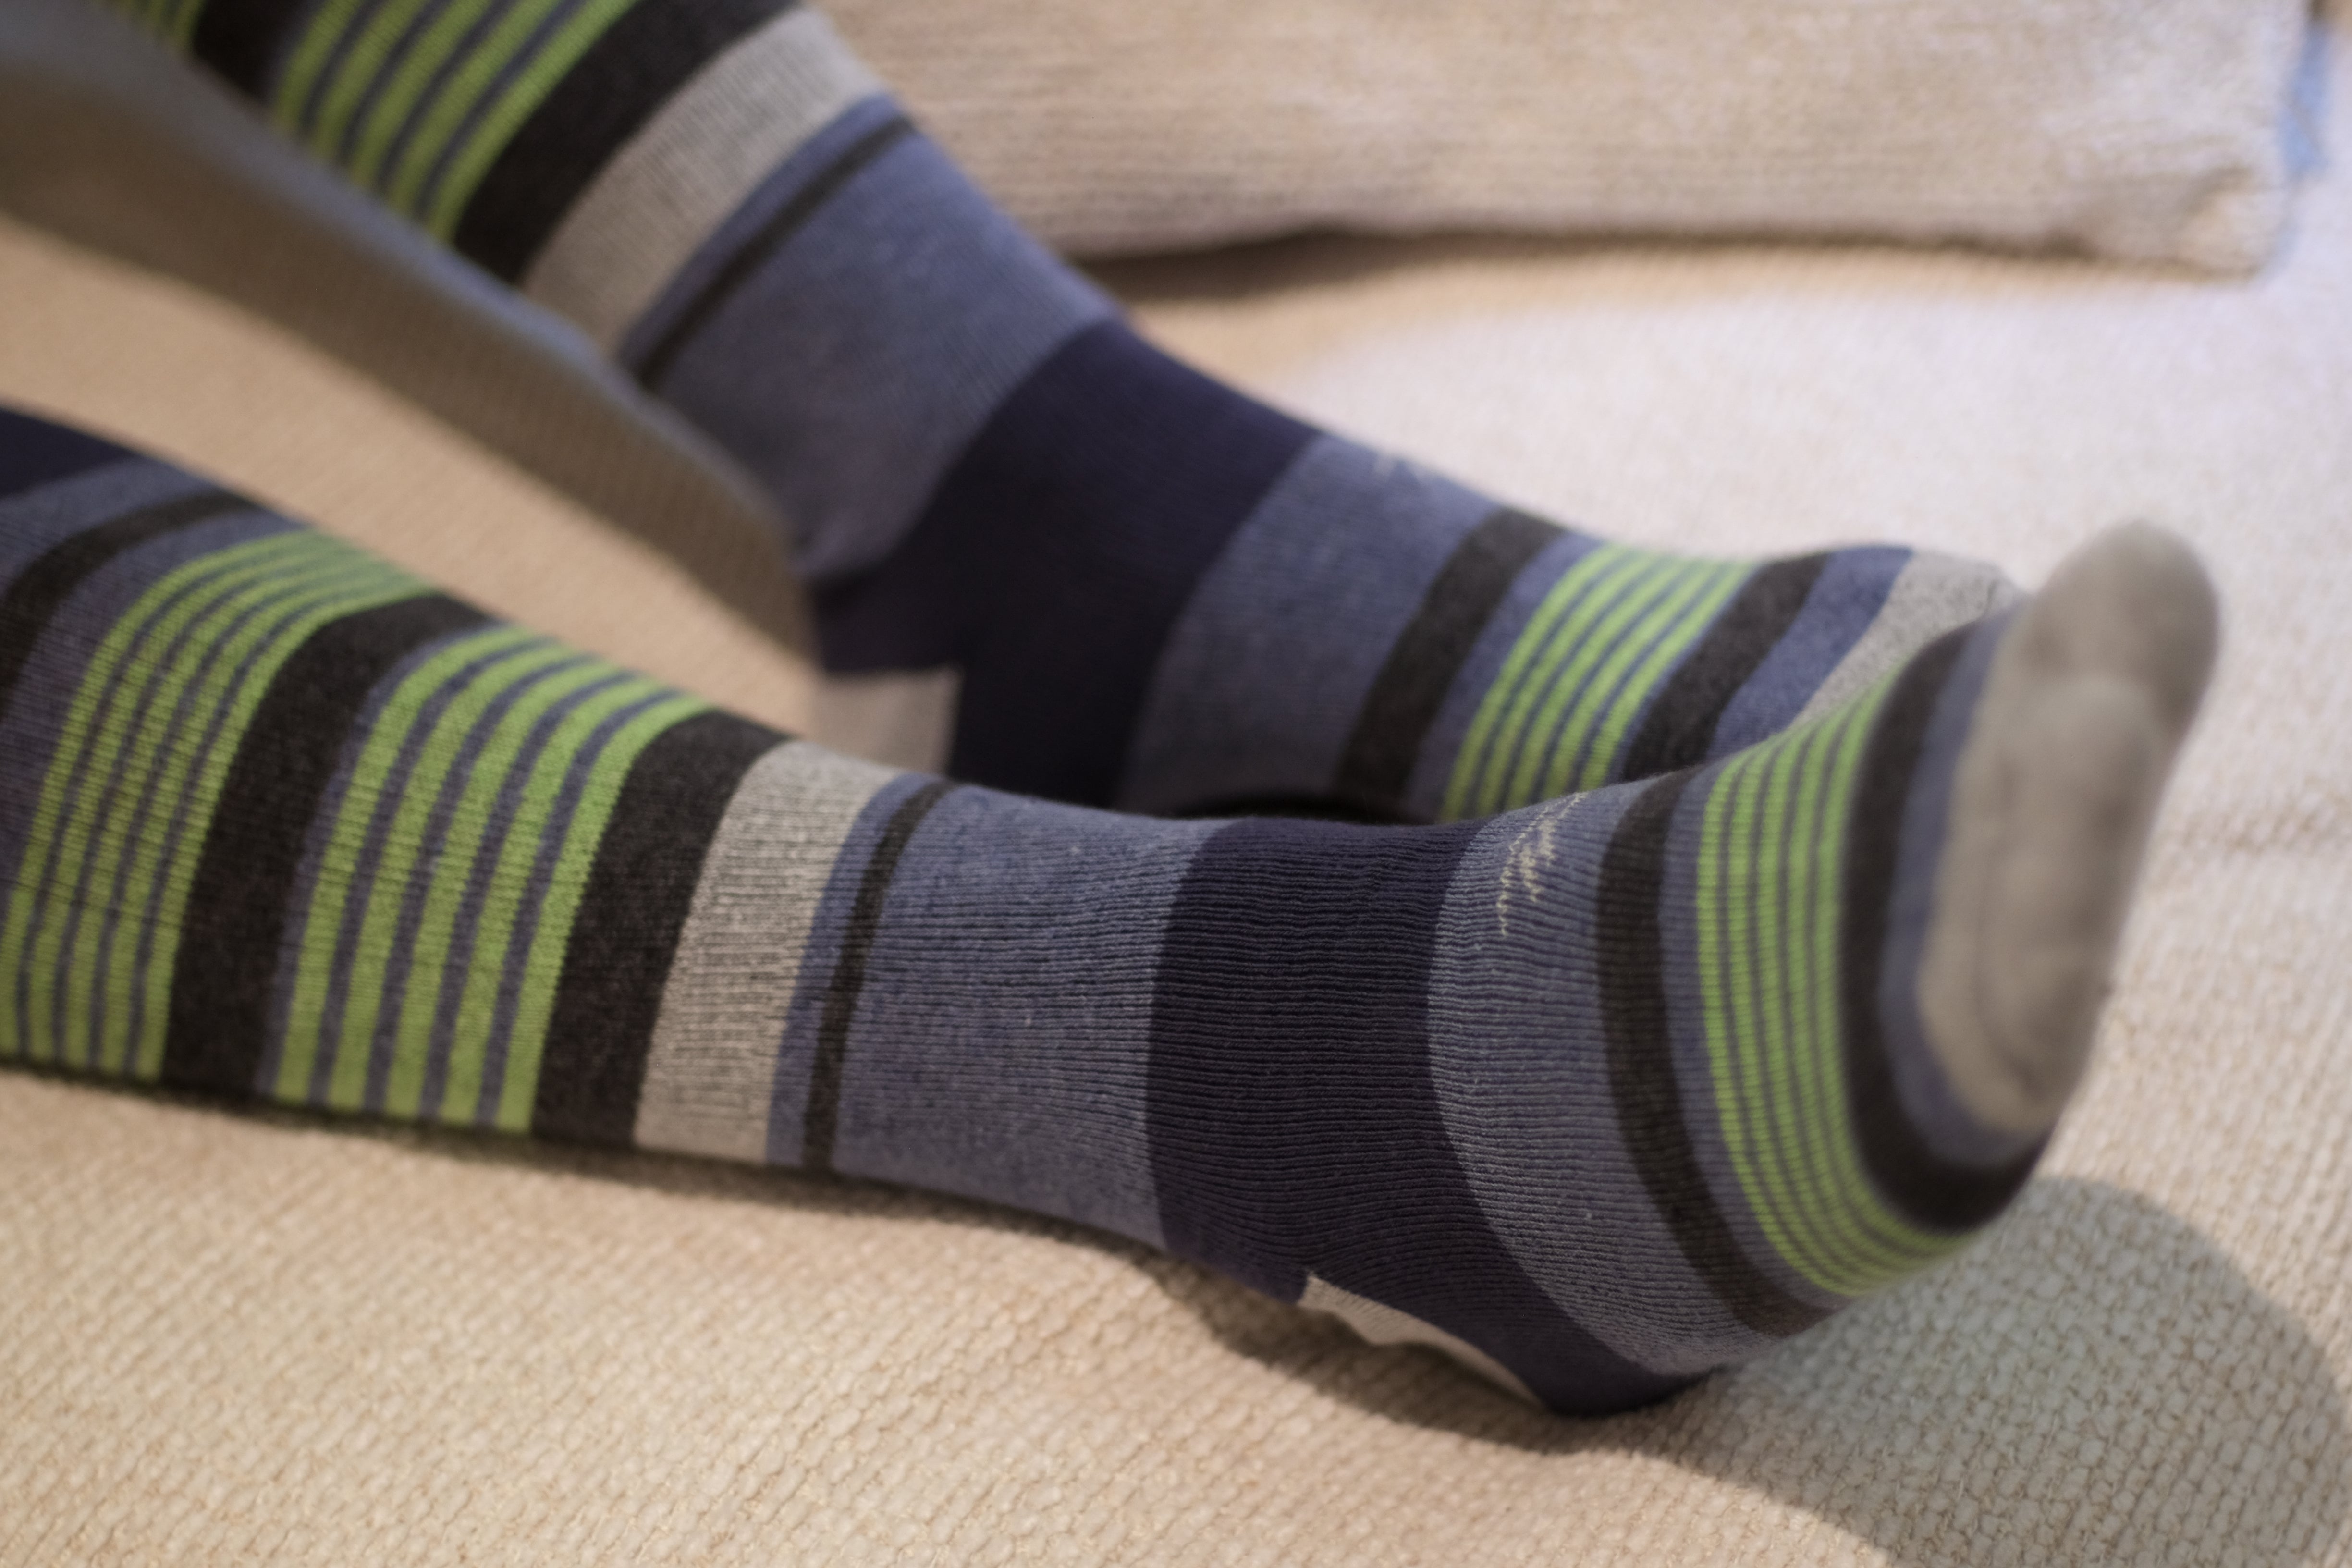 blue over the calf dress socks with light grey navy blue and light green stripes